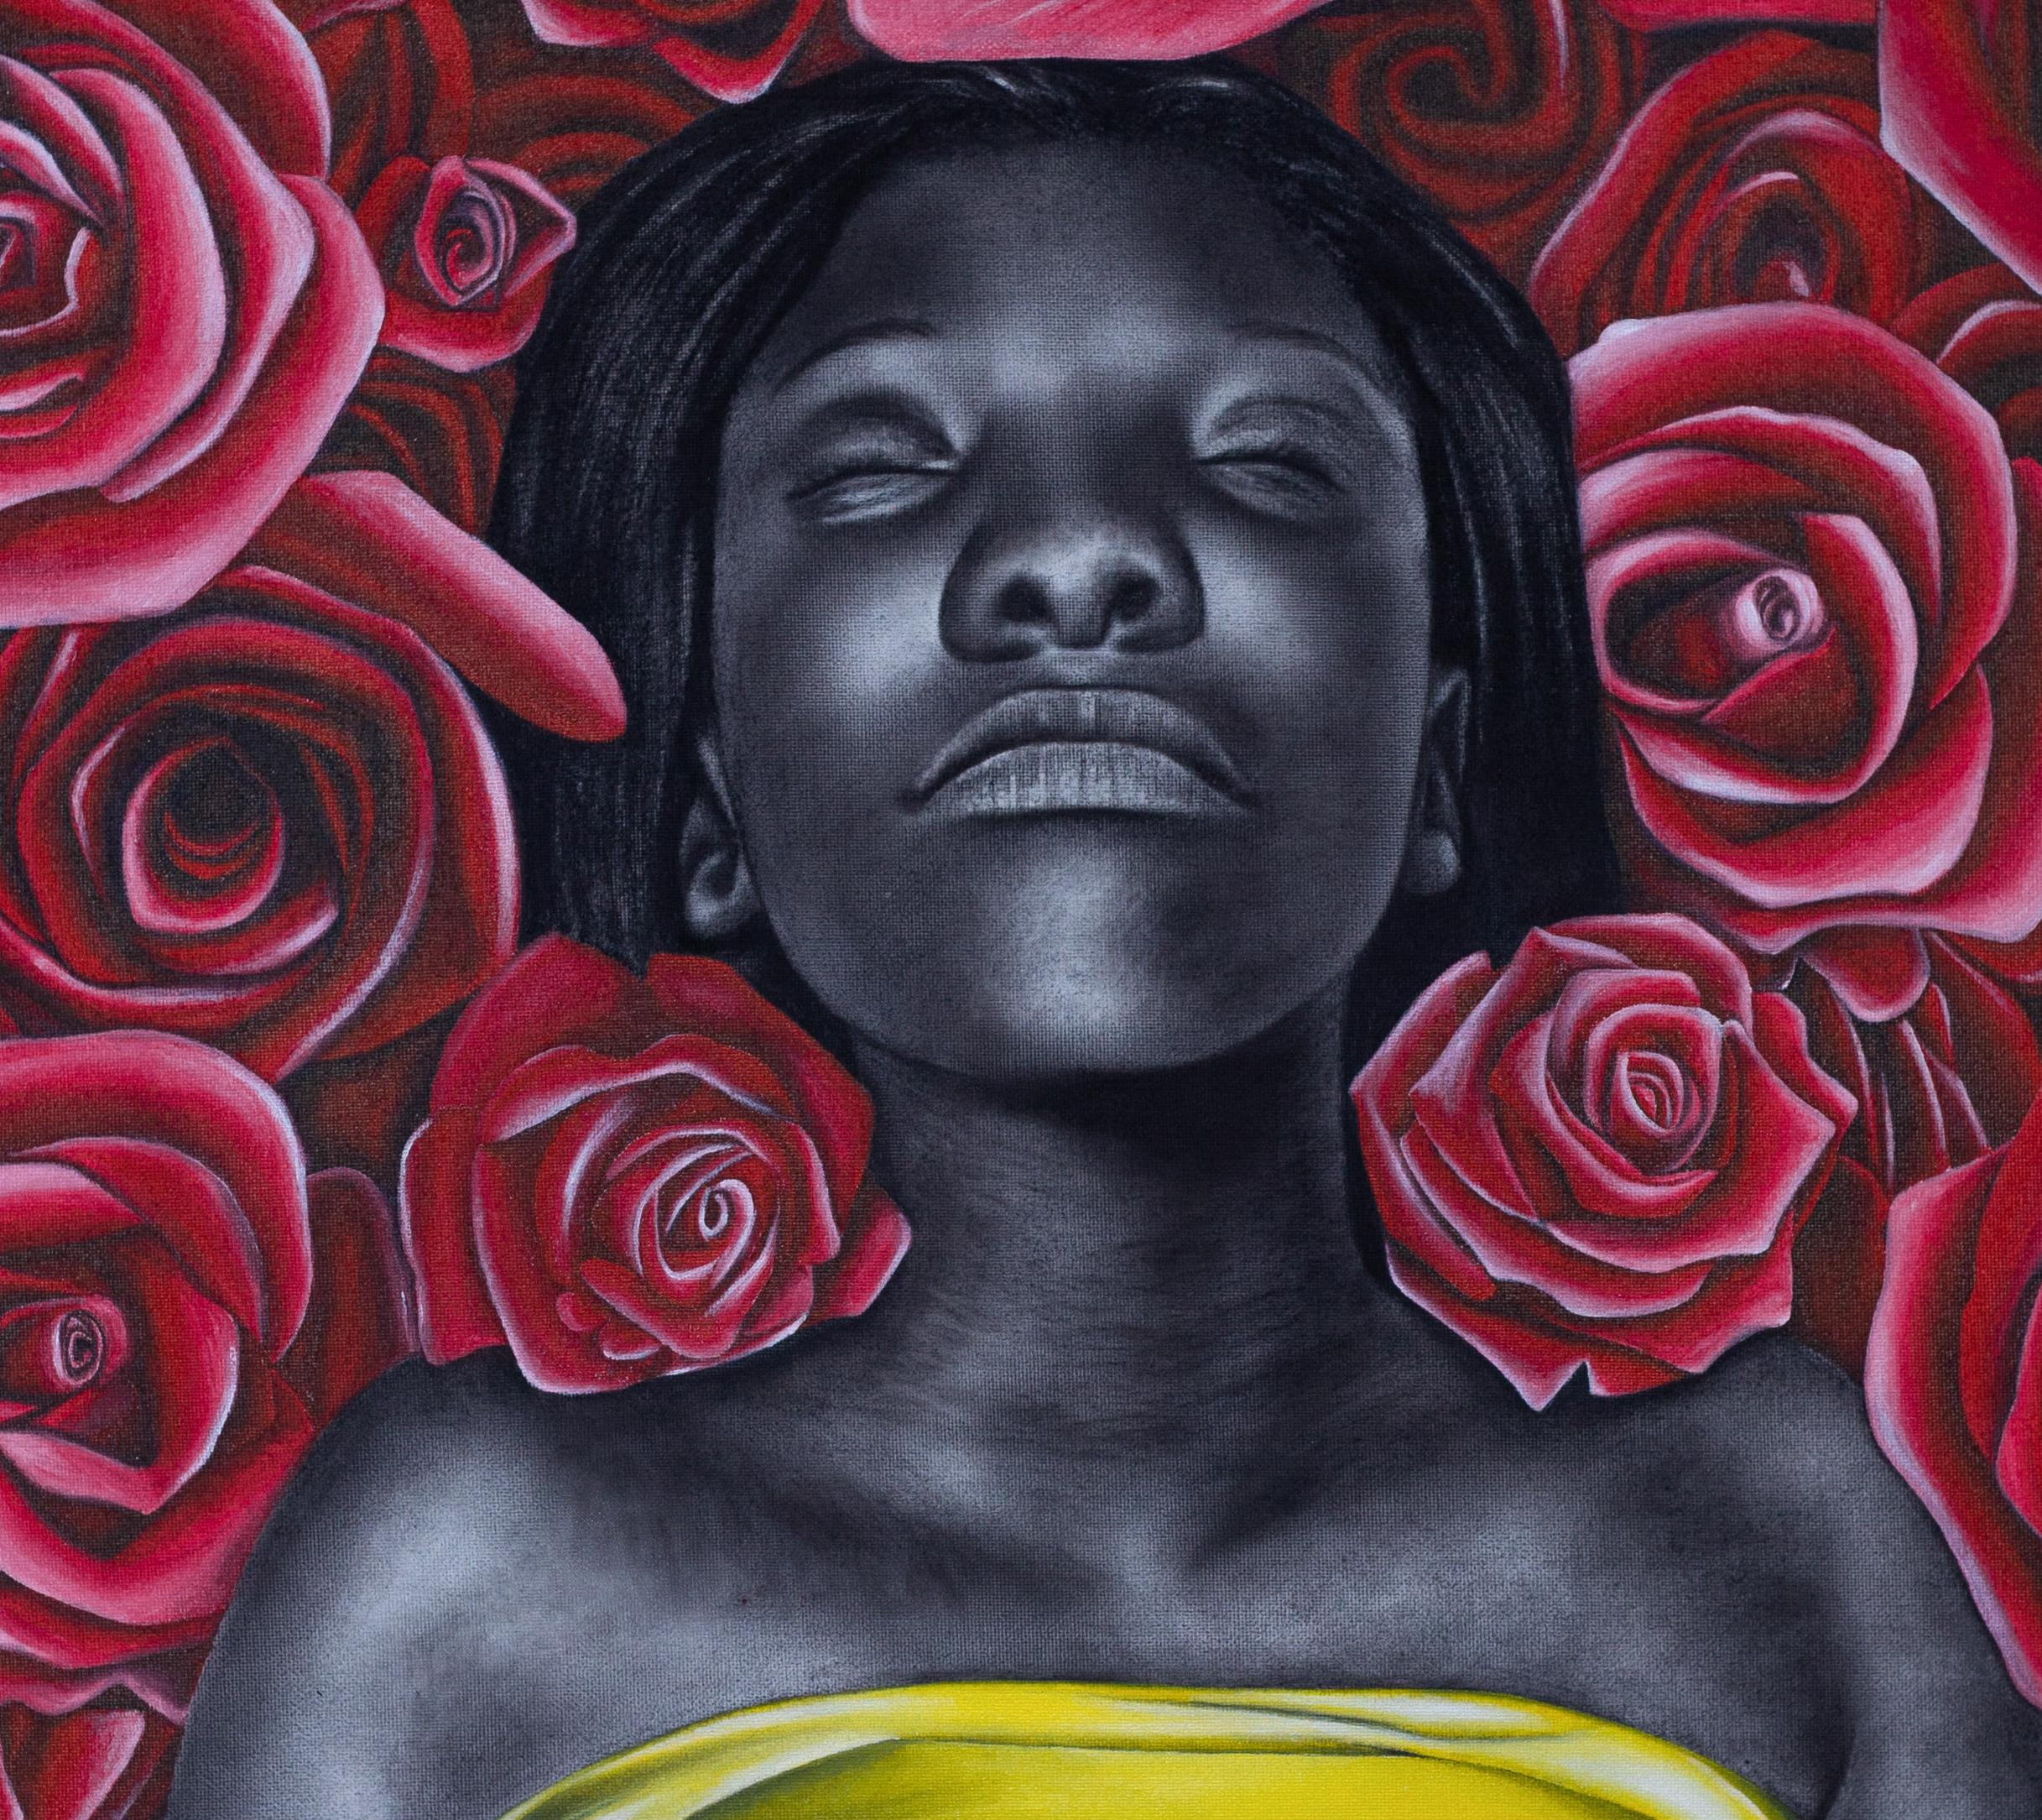 Bed of Roses is a Mixed Media painting by Damilola Olusegun. Damilola created 